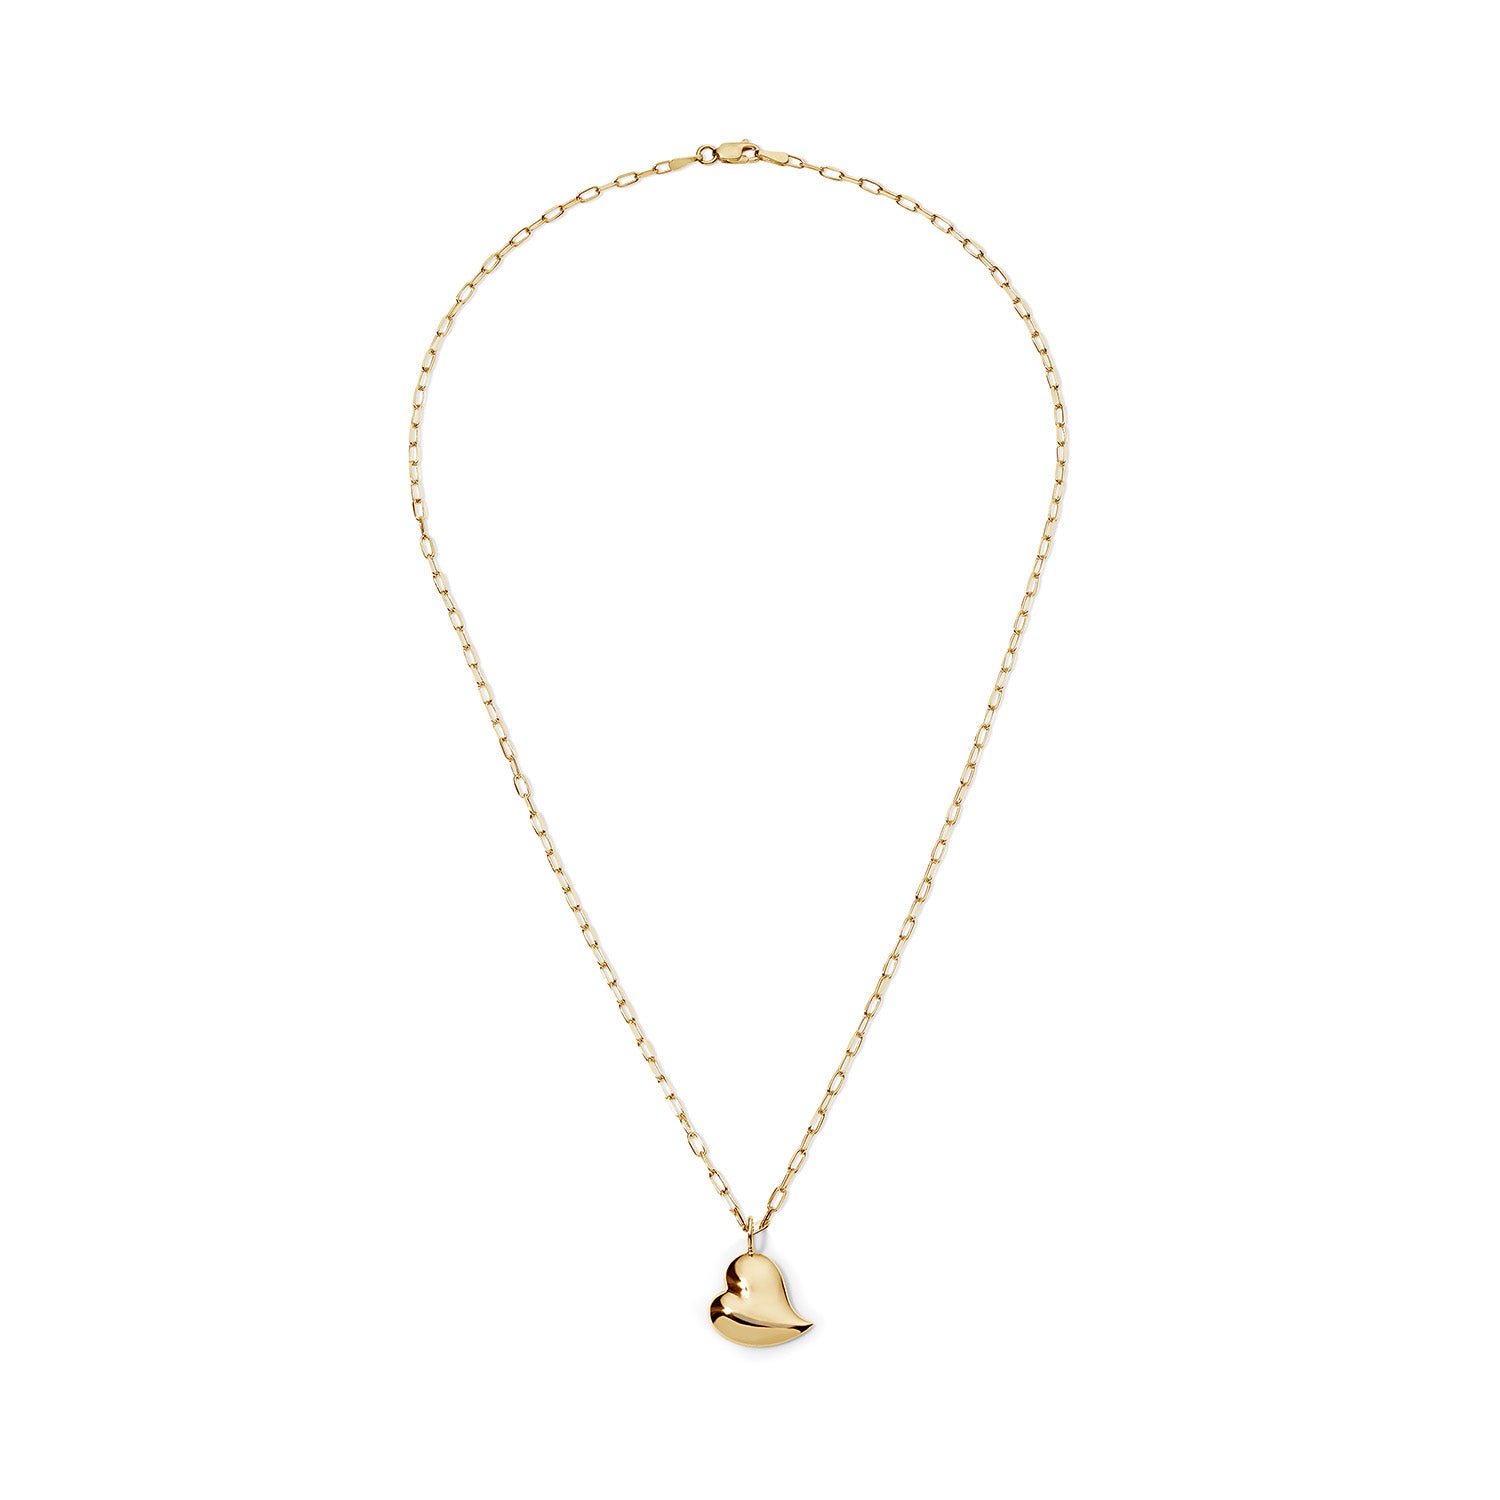 Heartfelt Gold Small Puffy Heart with Mini Paperclip Chain Necklace